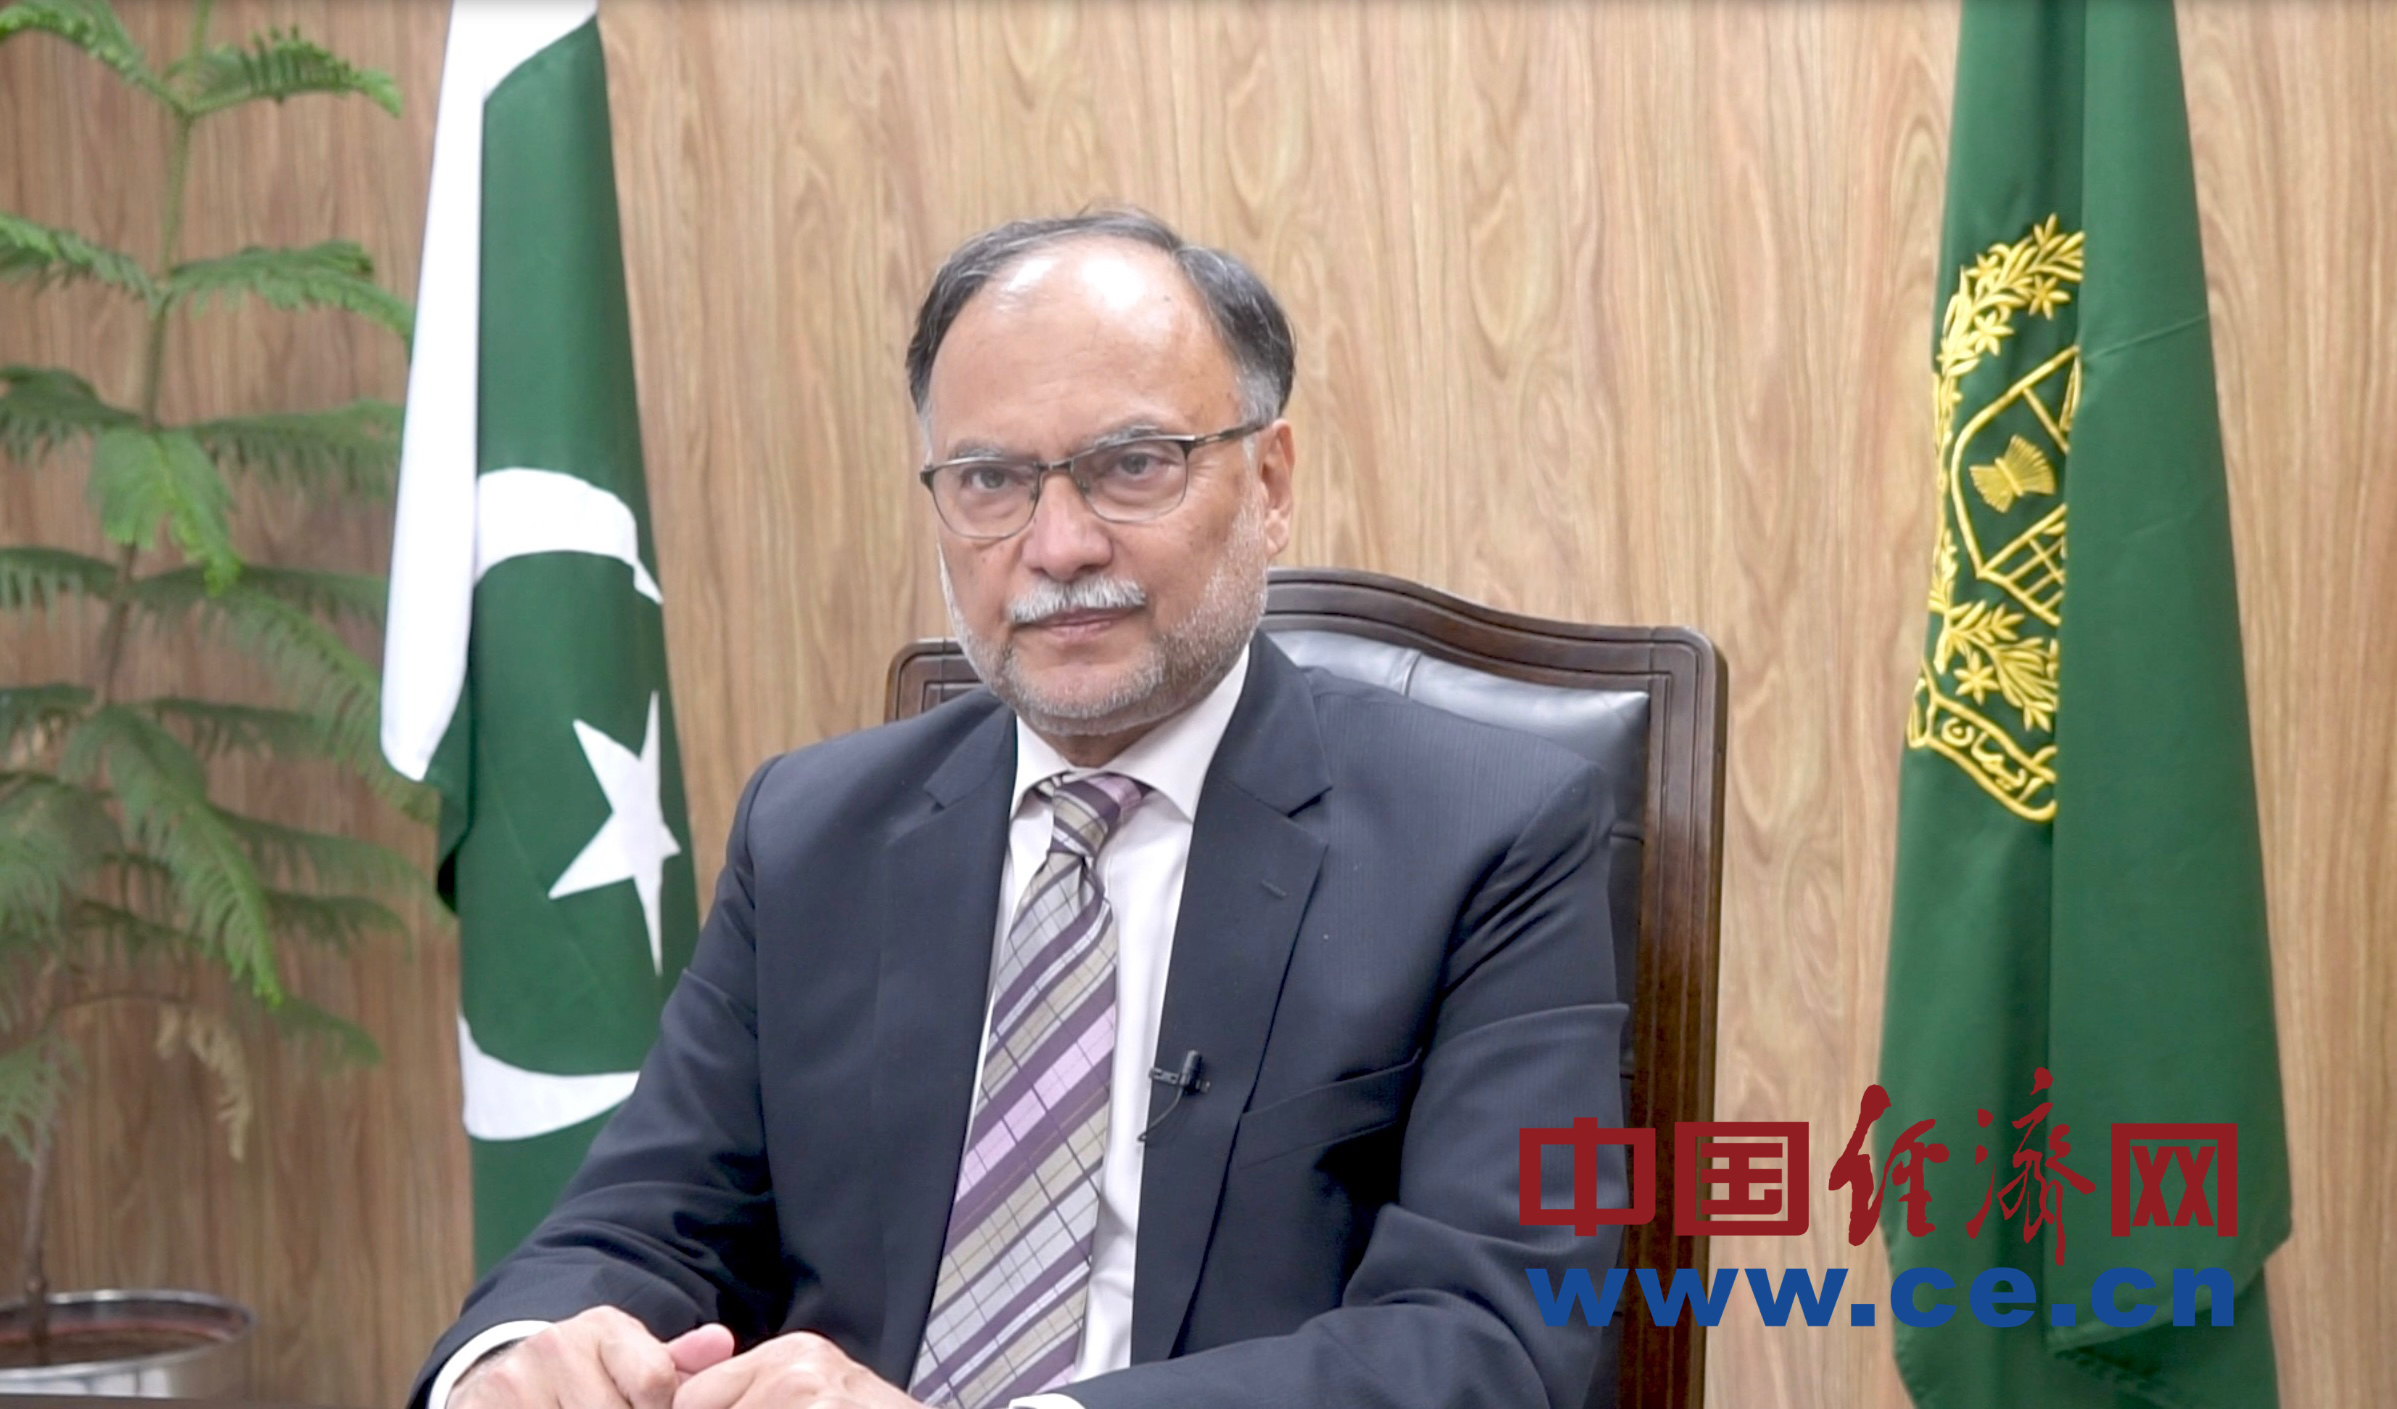 More opportunities ahead for Pakistan after 10 years of BRI: Ahsan Iqbal